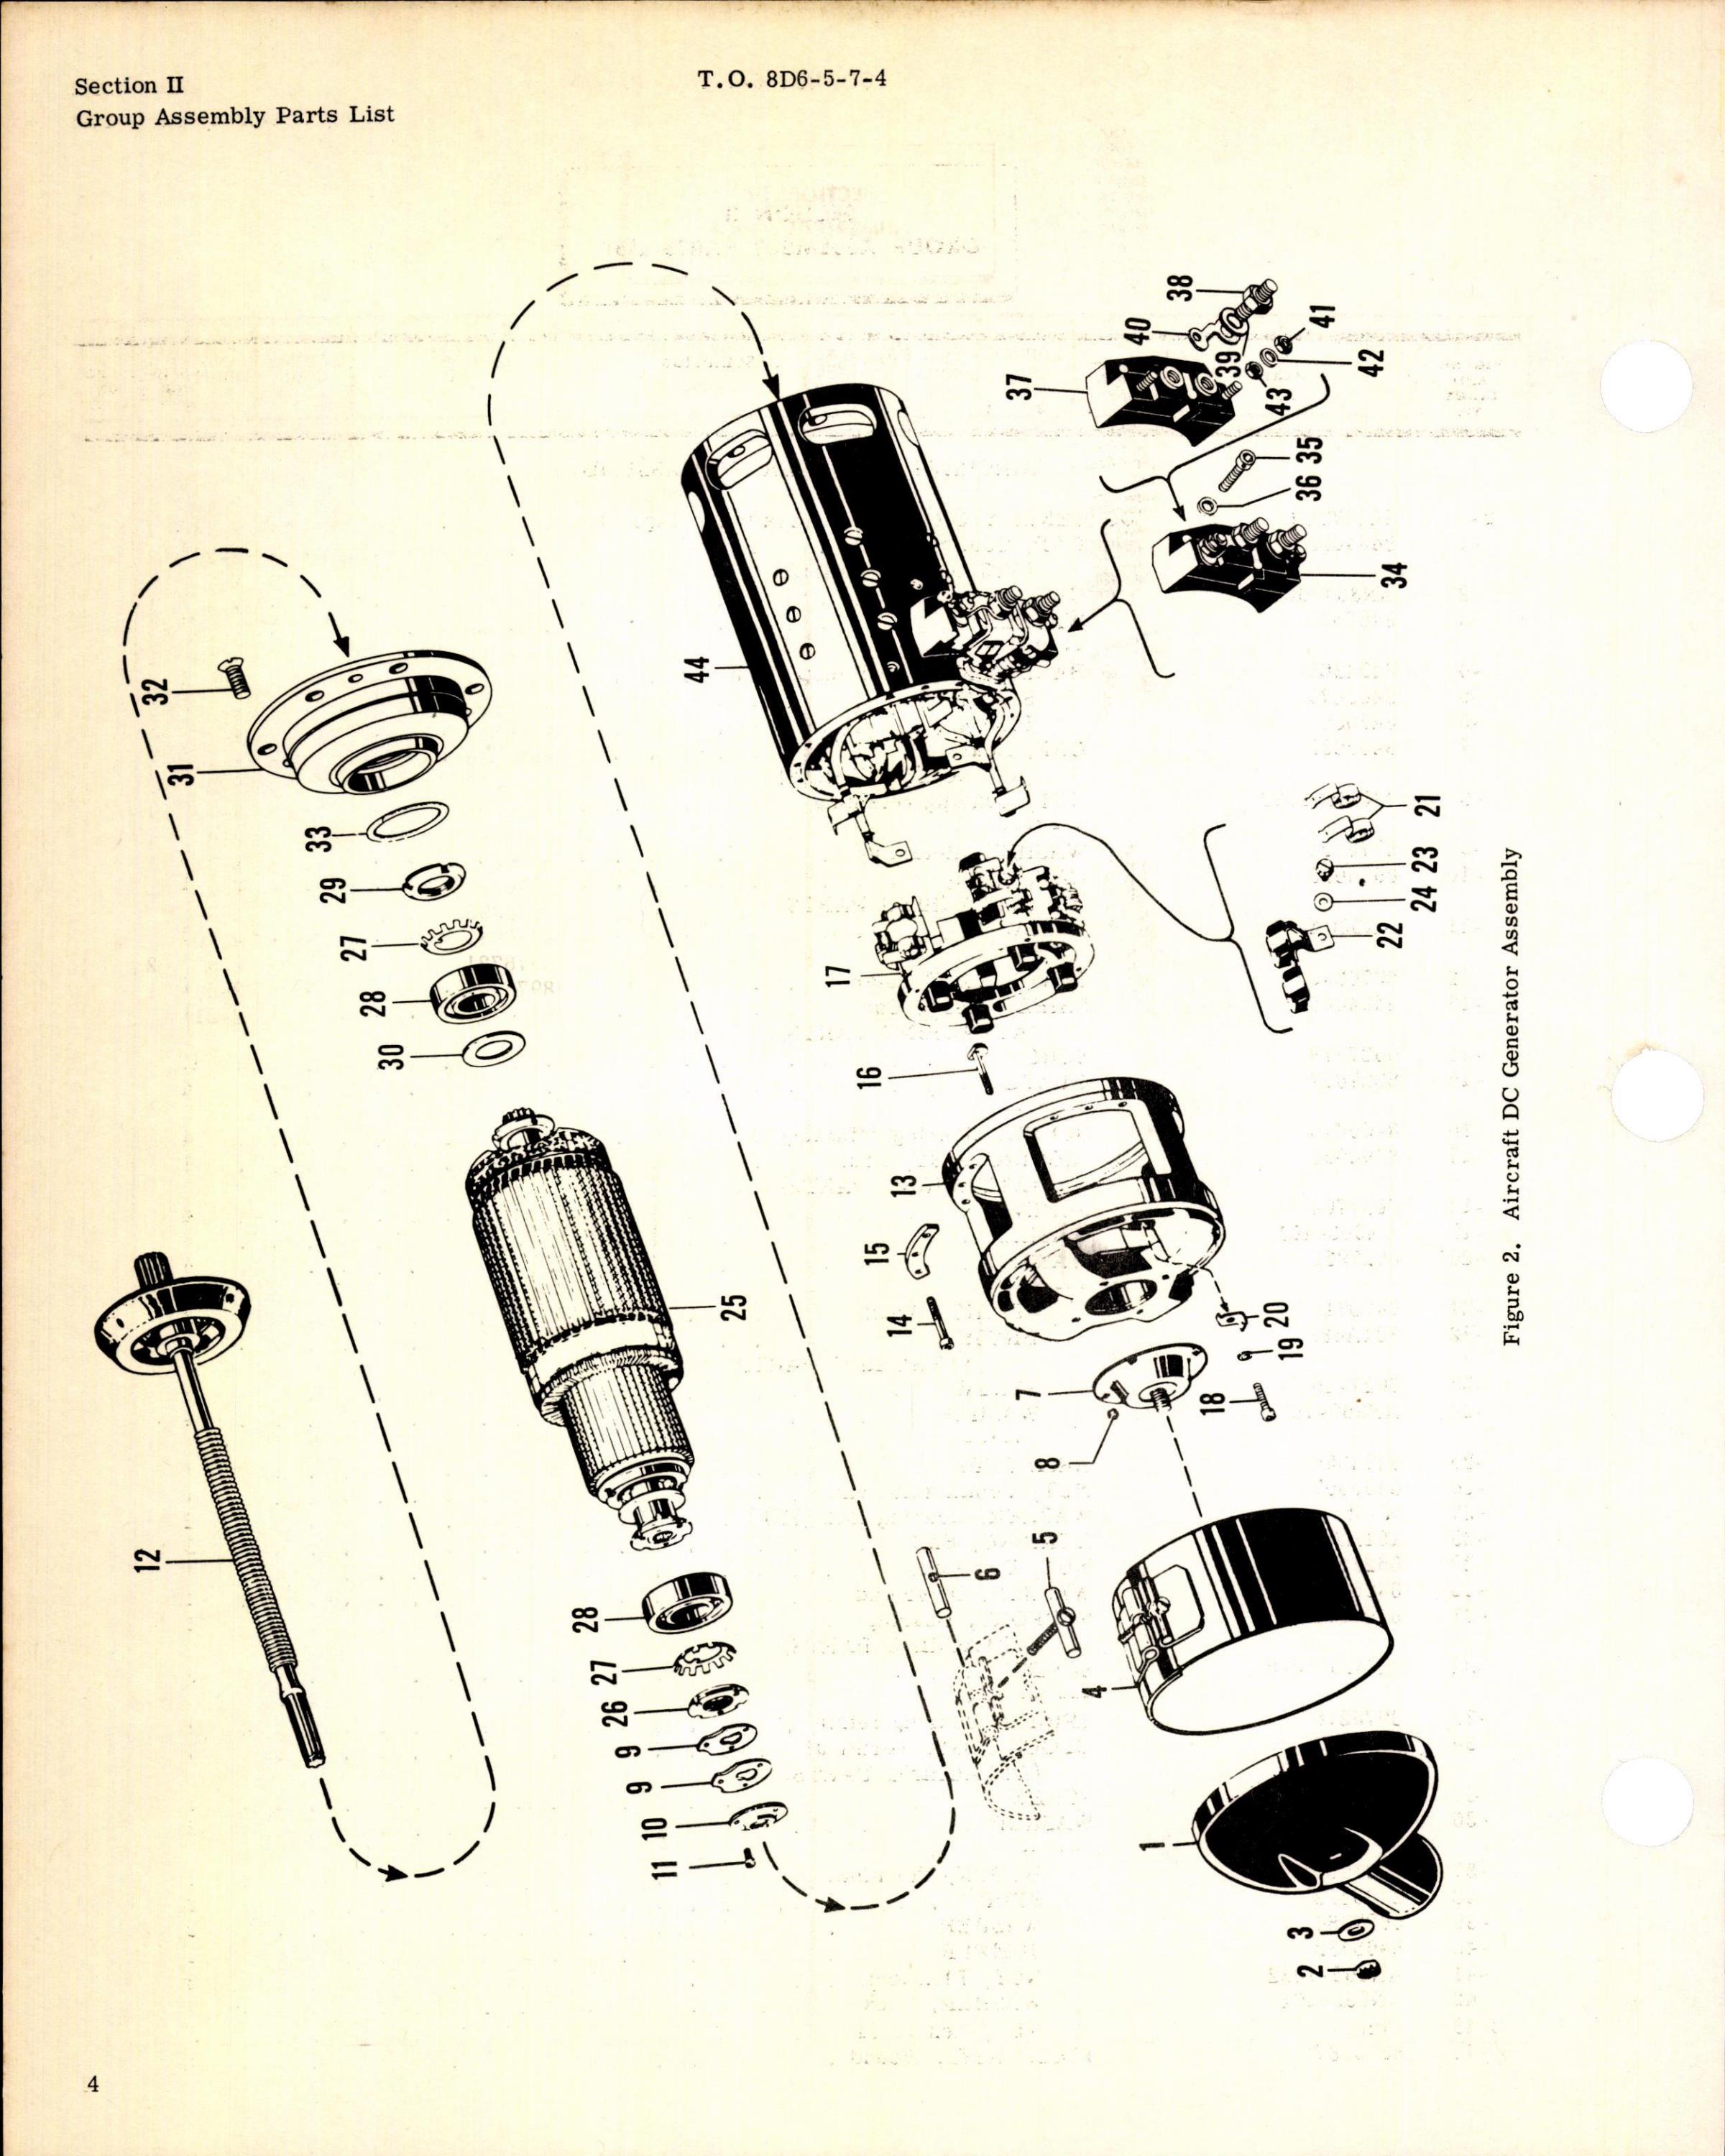 Sample page 4 from AirCorps Library document: Parts Breakdown for Aircraft Generator Model